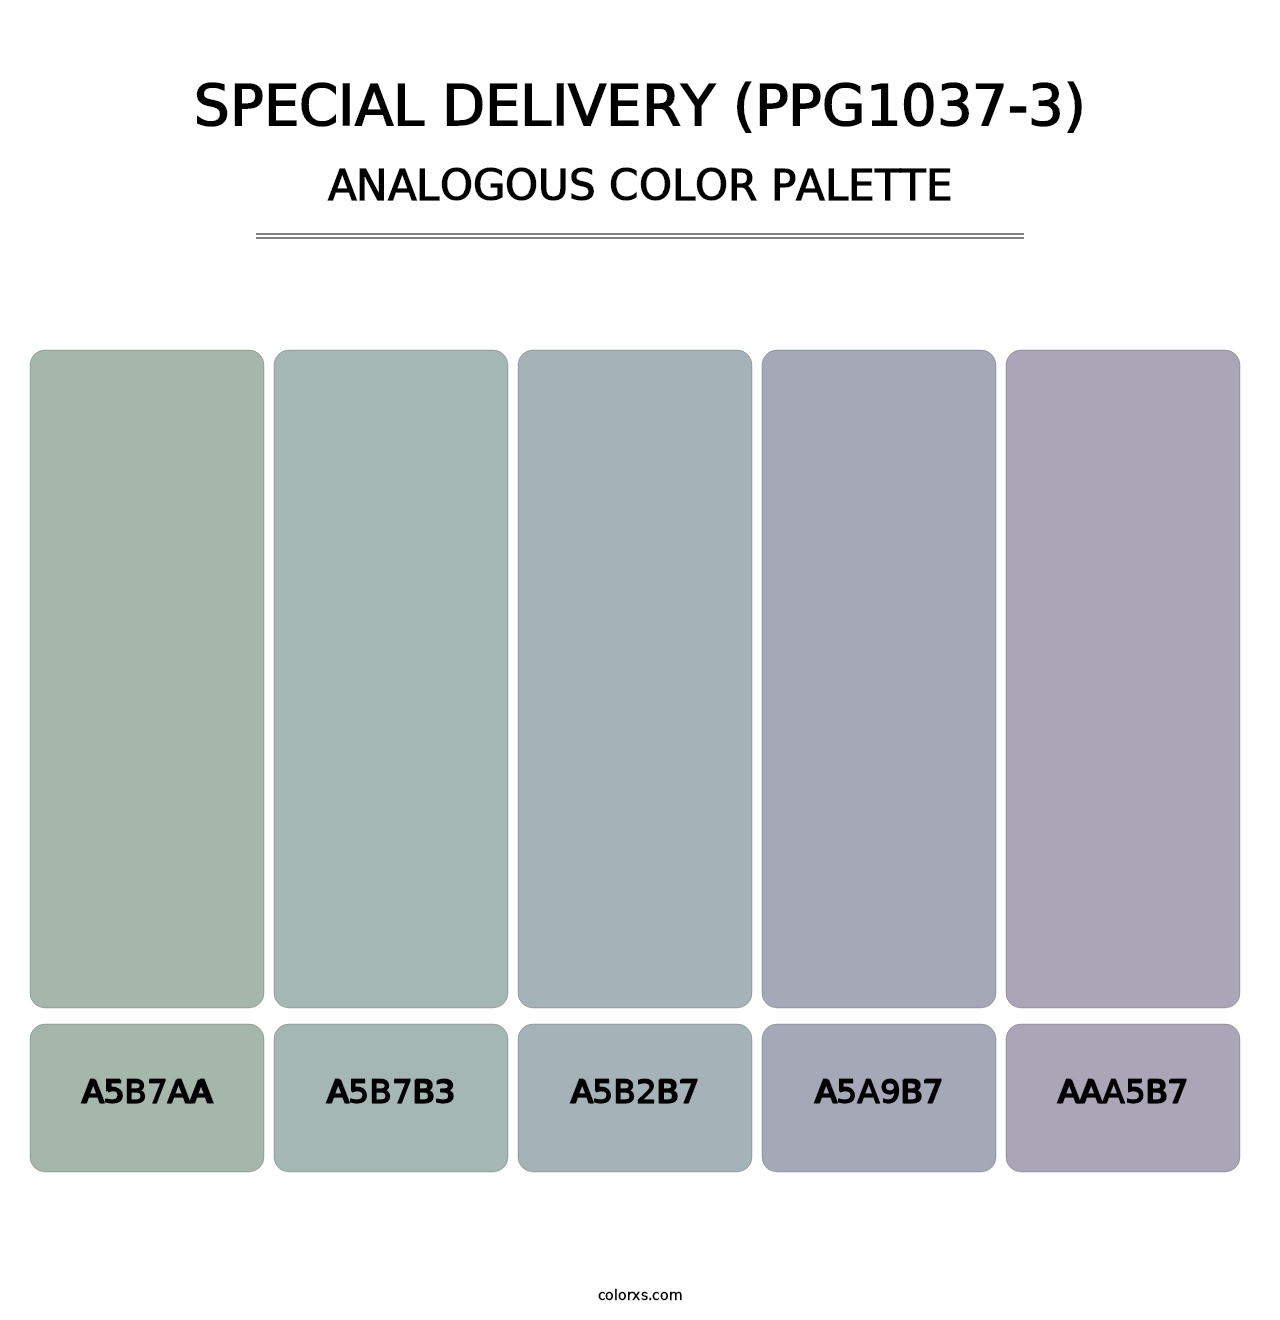 Special Delivery (PPG1037-3) - Analogous Color Palette